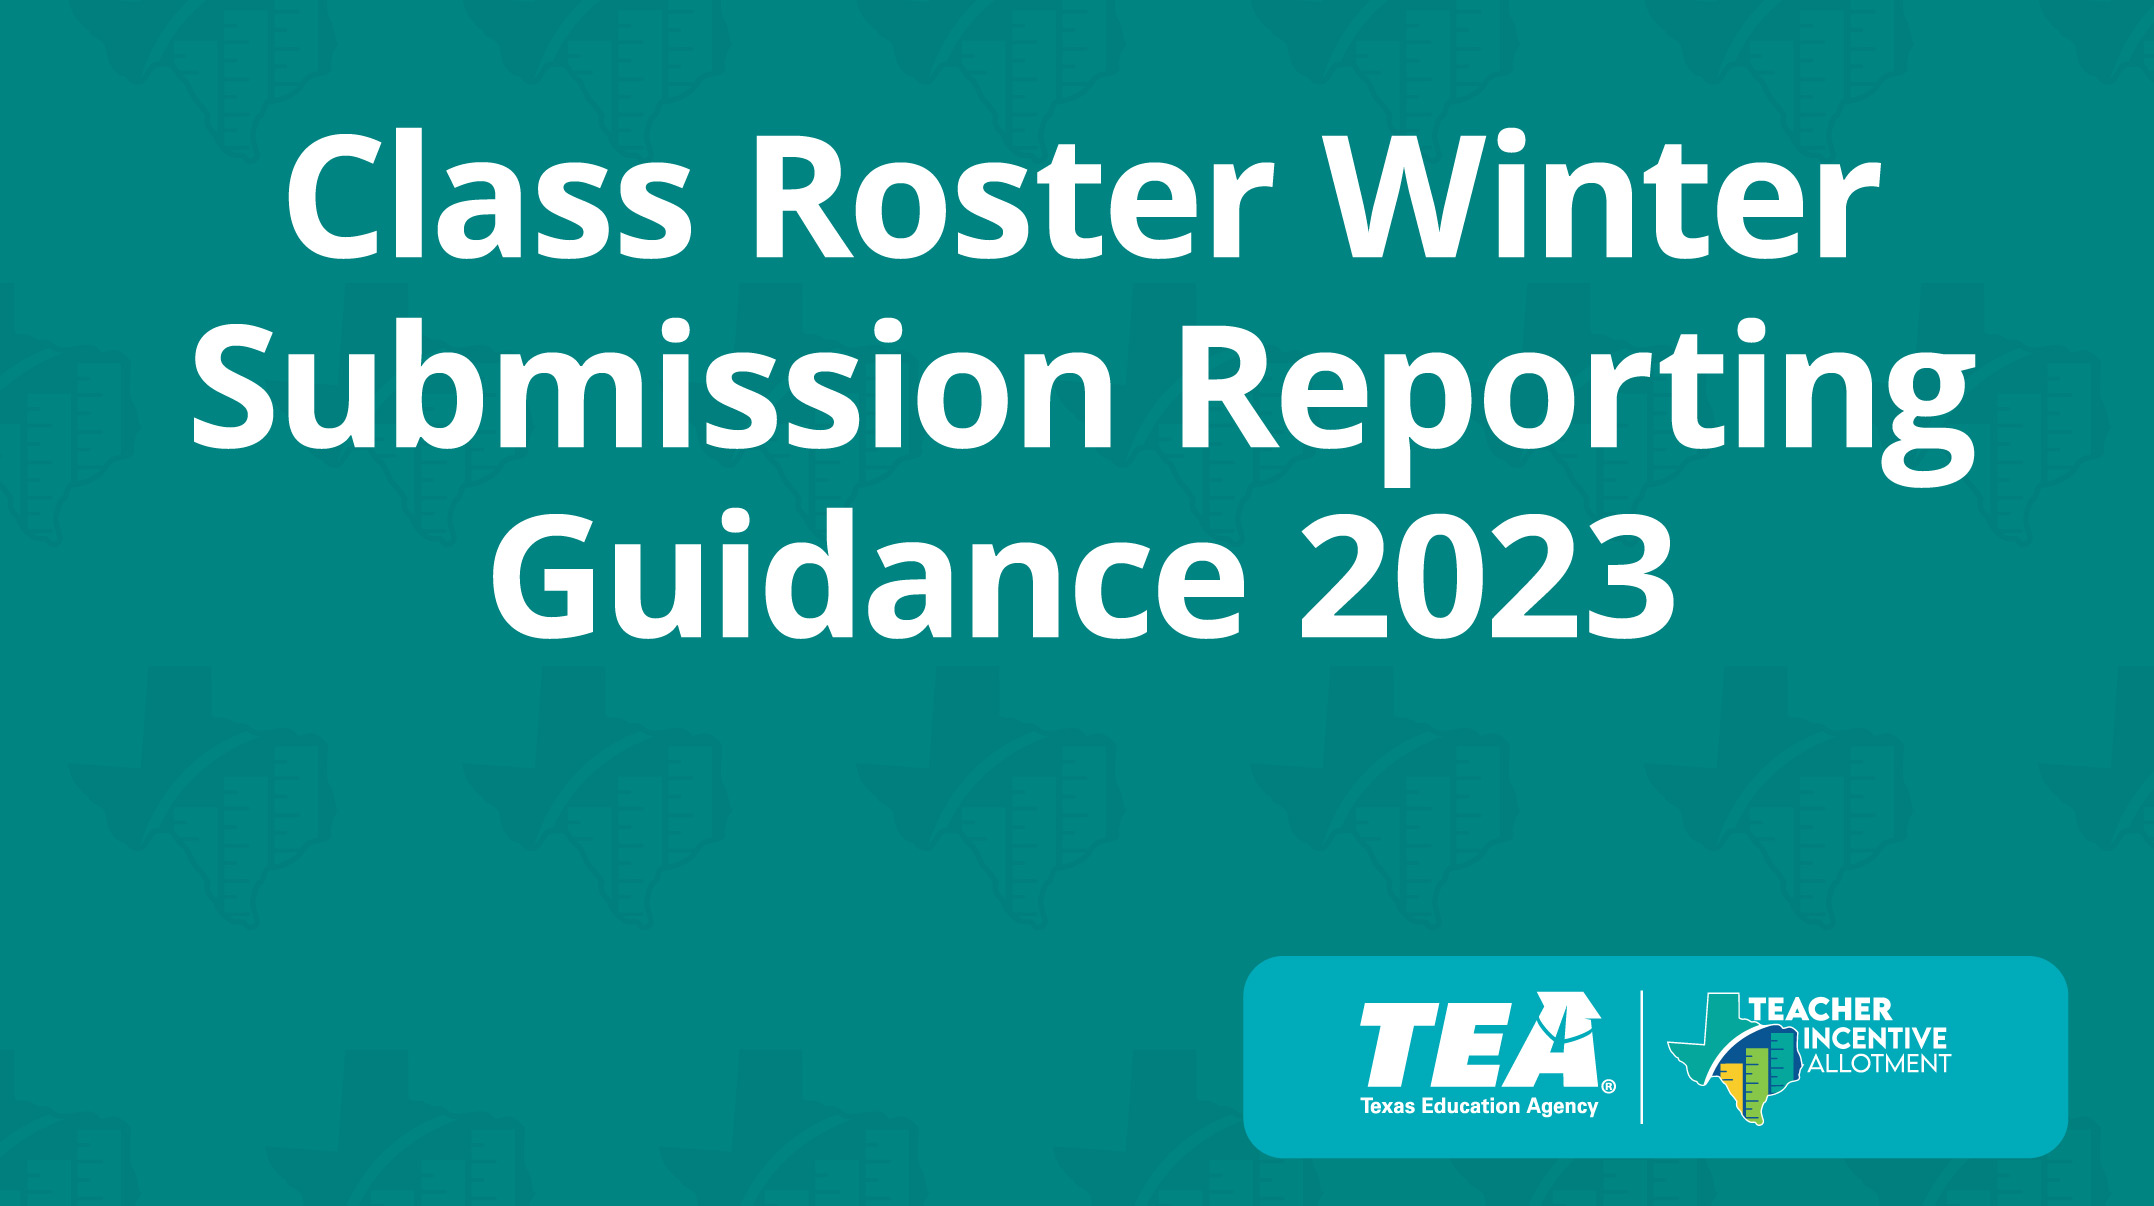 Class Roster Winter Submission Reporting Guidance 2023